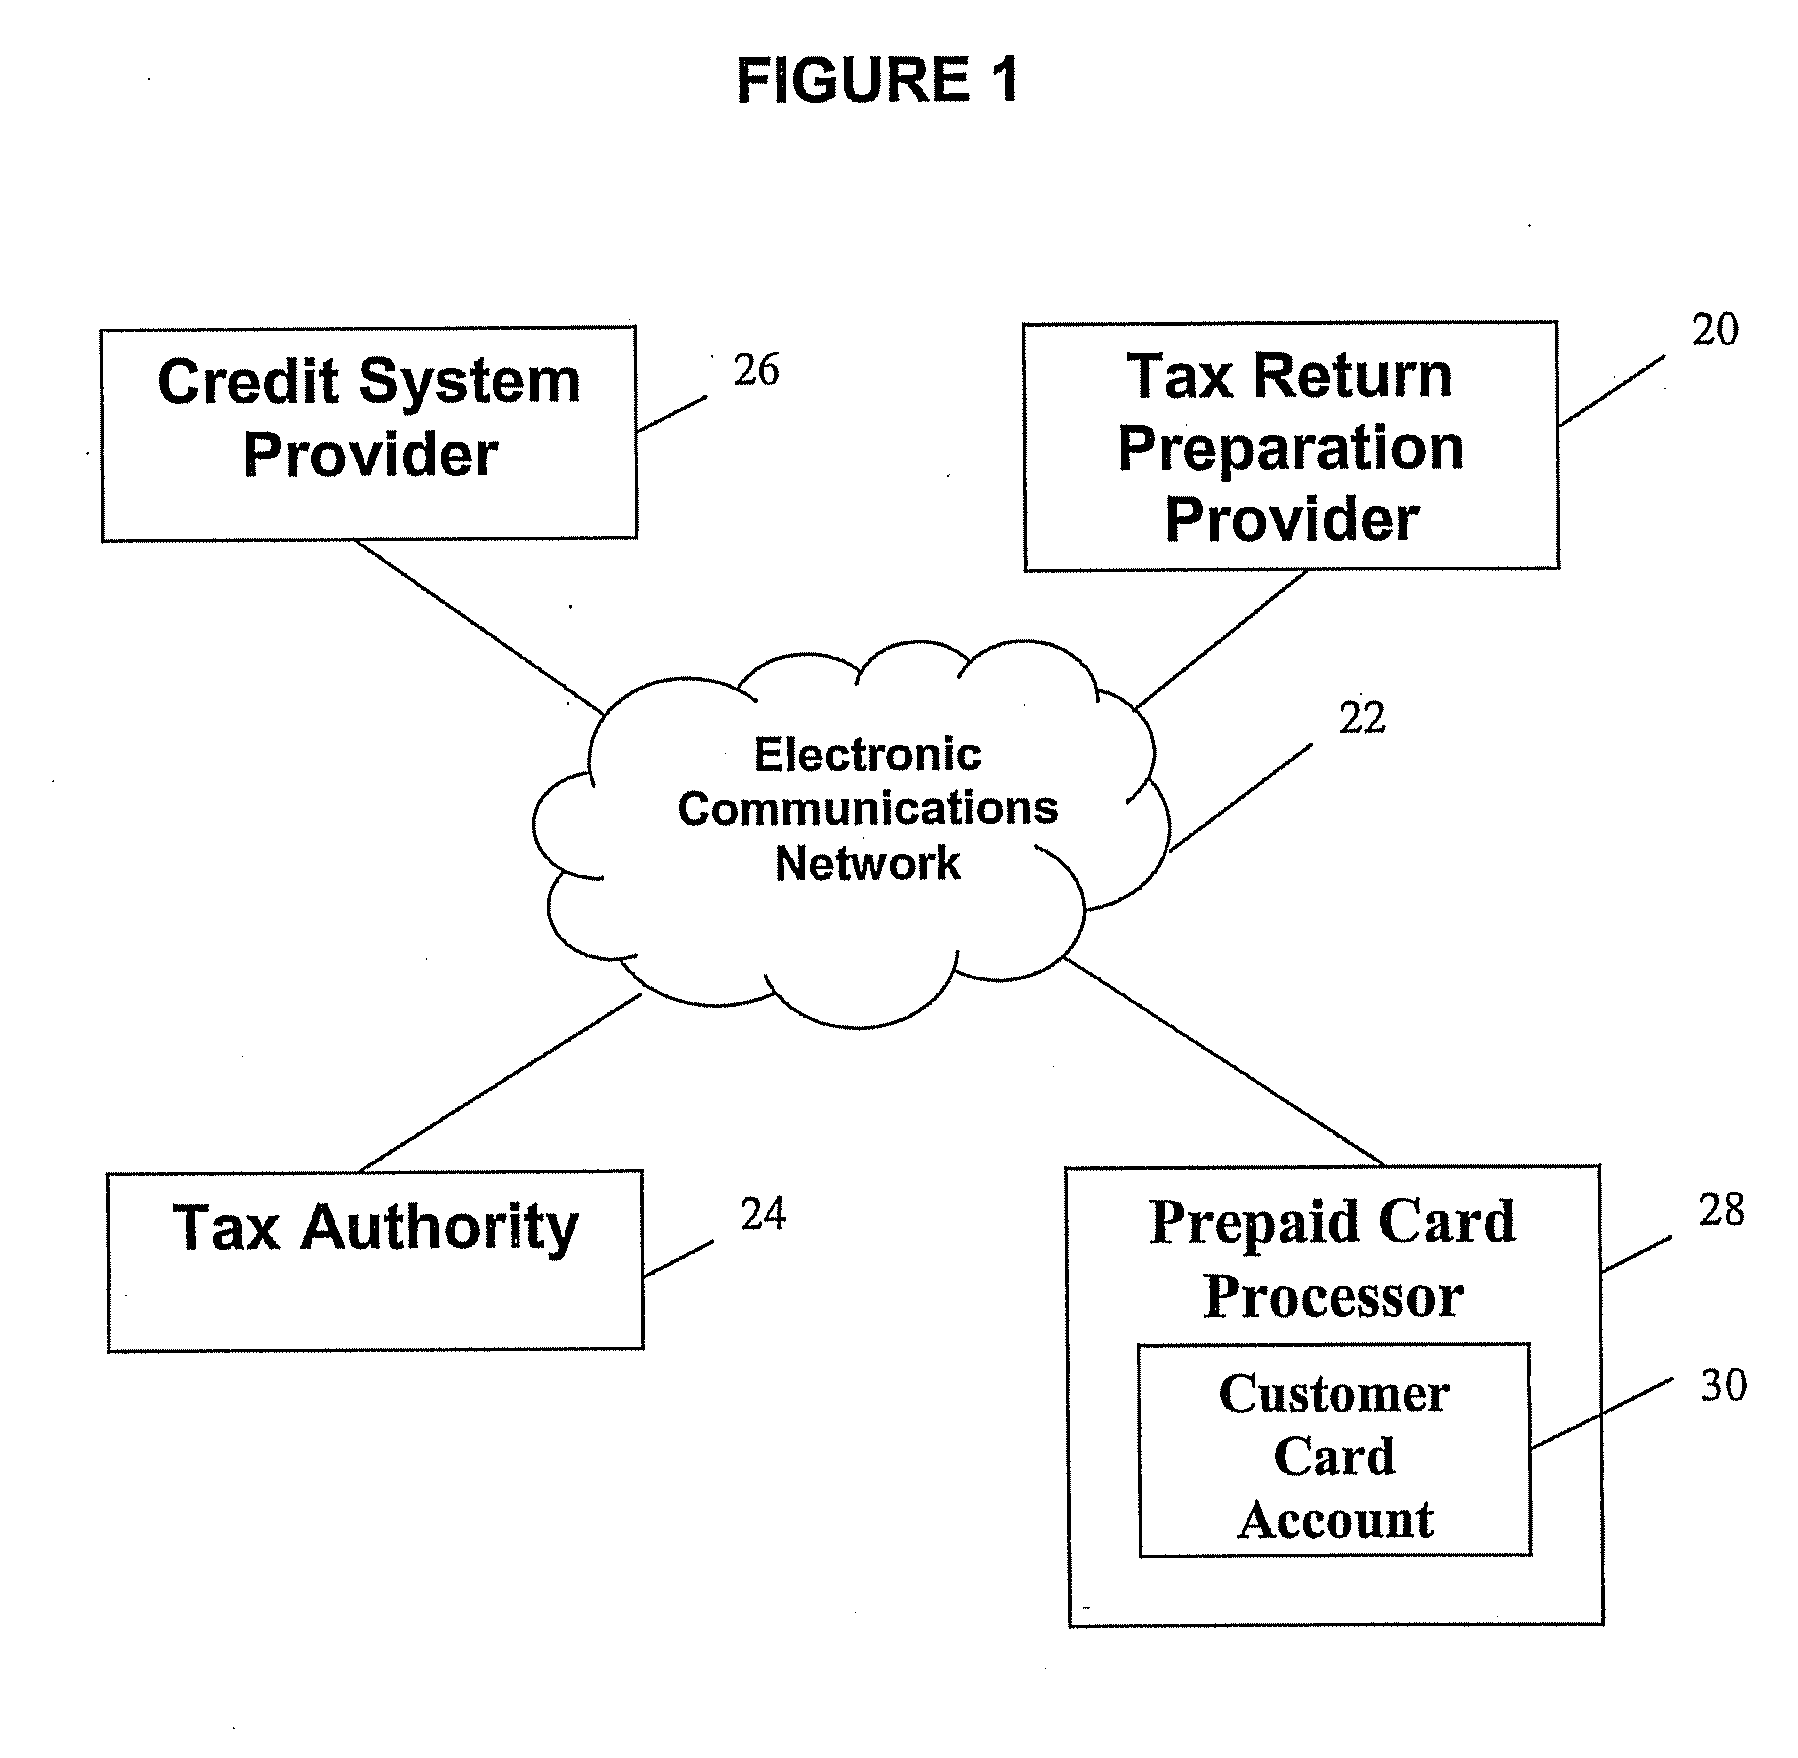 Computerized Extension Of Credit To Existing Demand Deposit Accounts, Prepaid Cards And Lines Of Credit Based On Expected Tax Refund Proceeds, Associated Systems And Computer Program Products